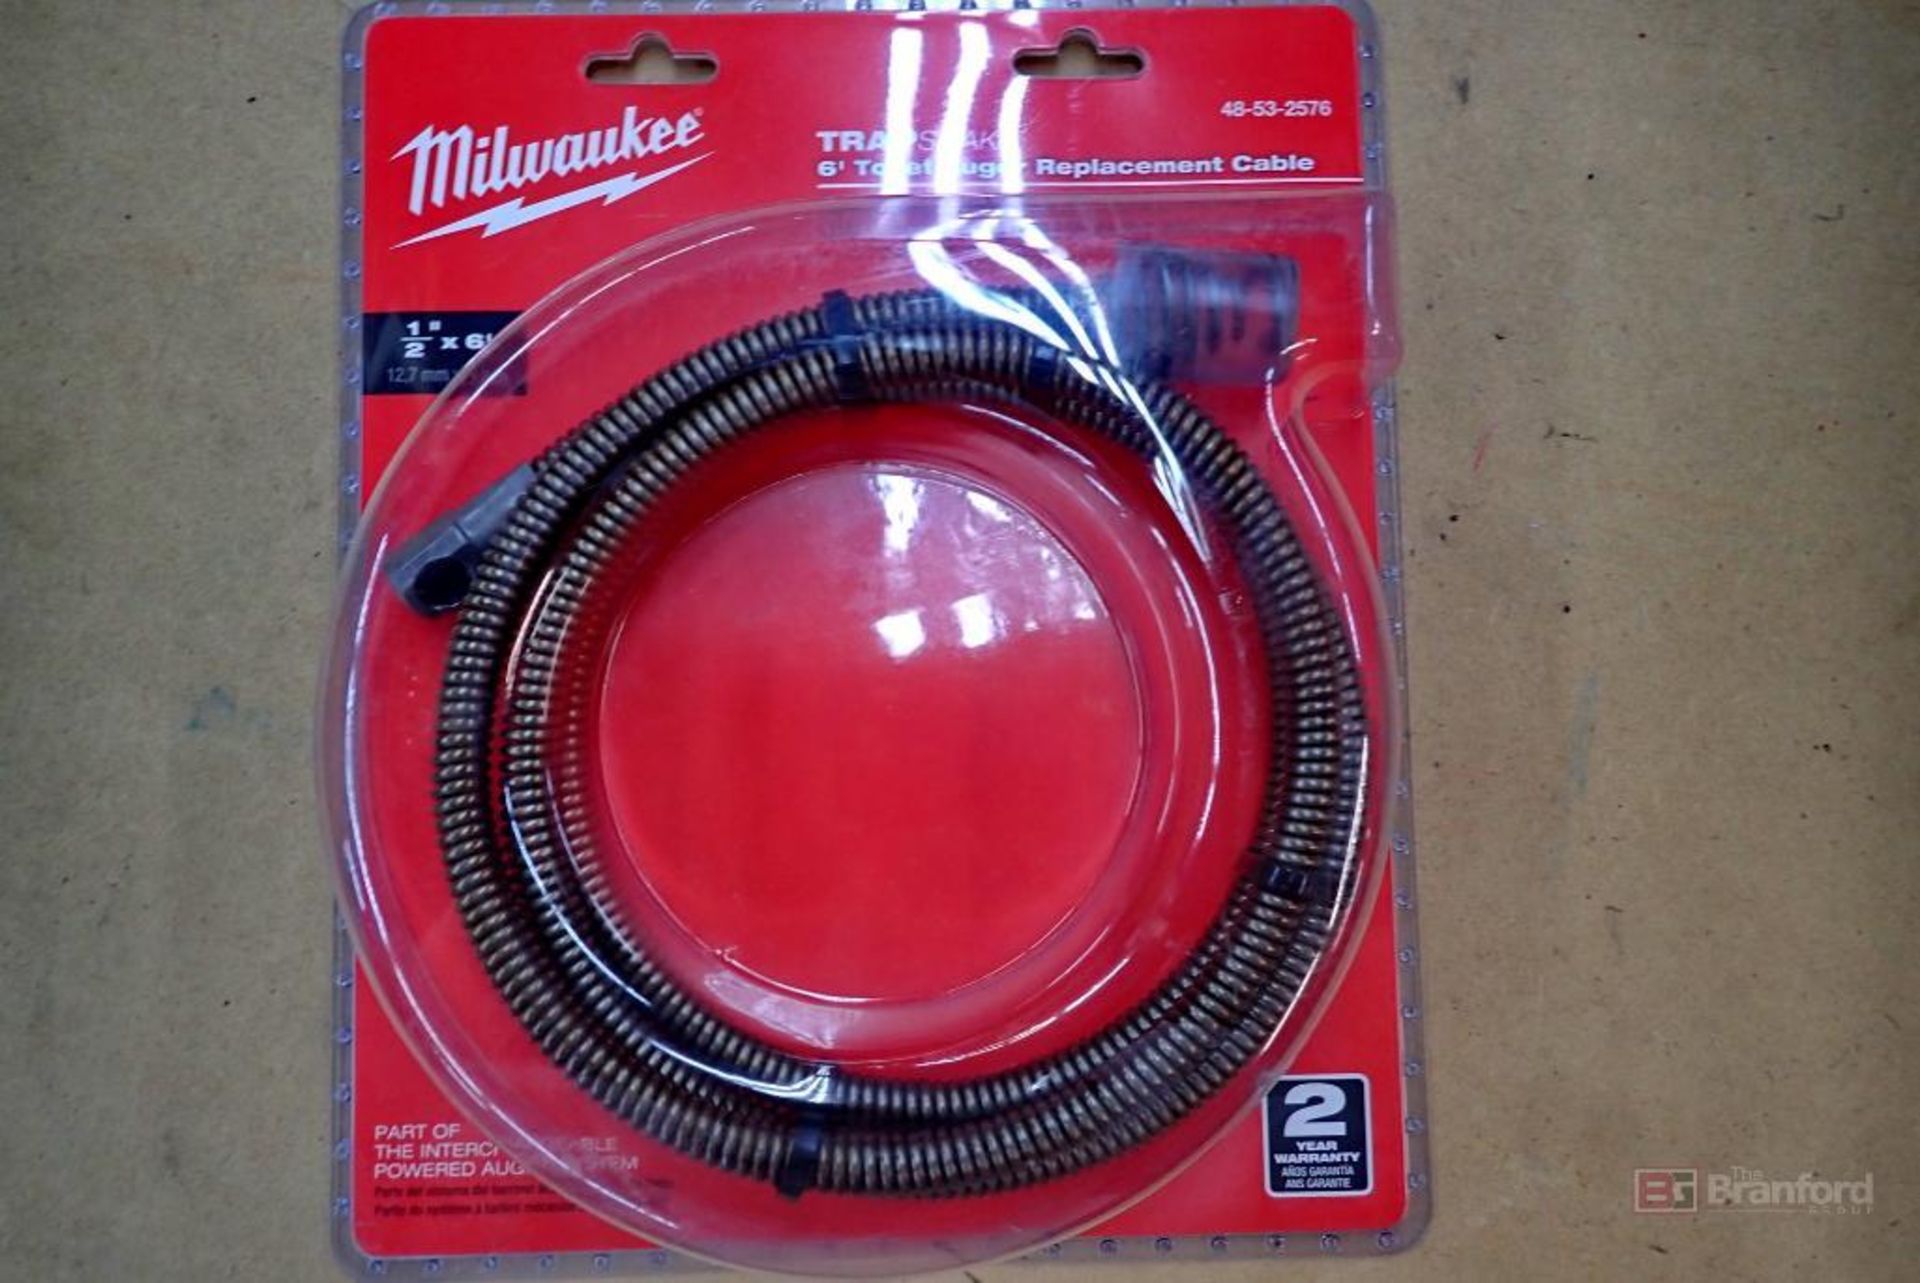 (3) Milwaukee 48-53-2576 TRAPSNAKE 6' Toilet Auger Replacement Cables - Image 2 of 4